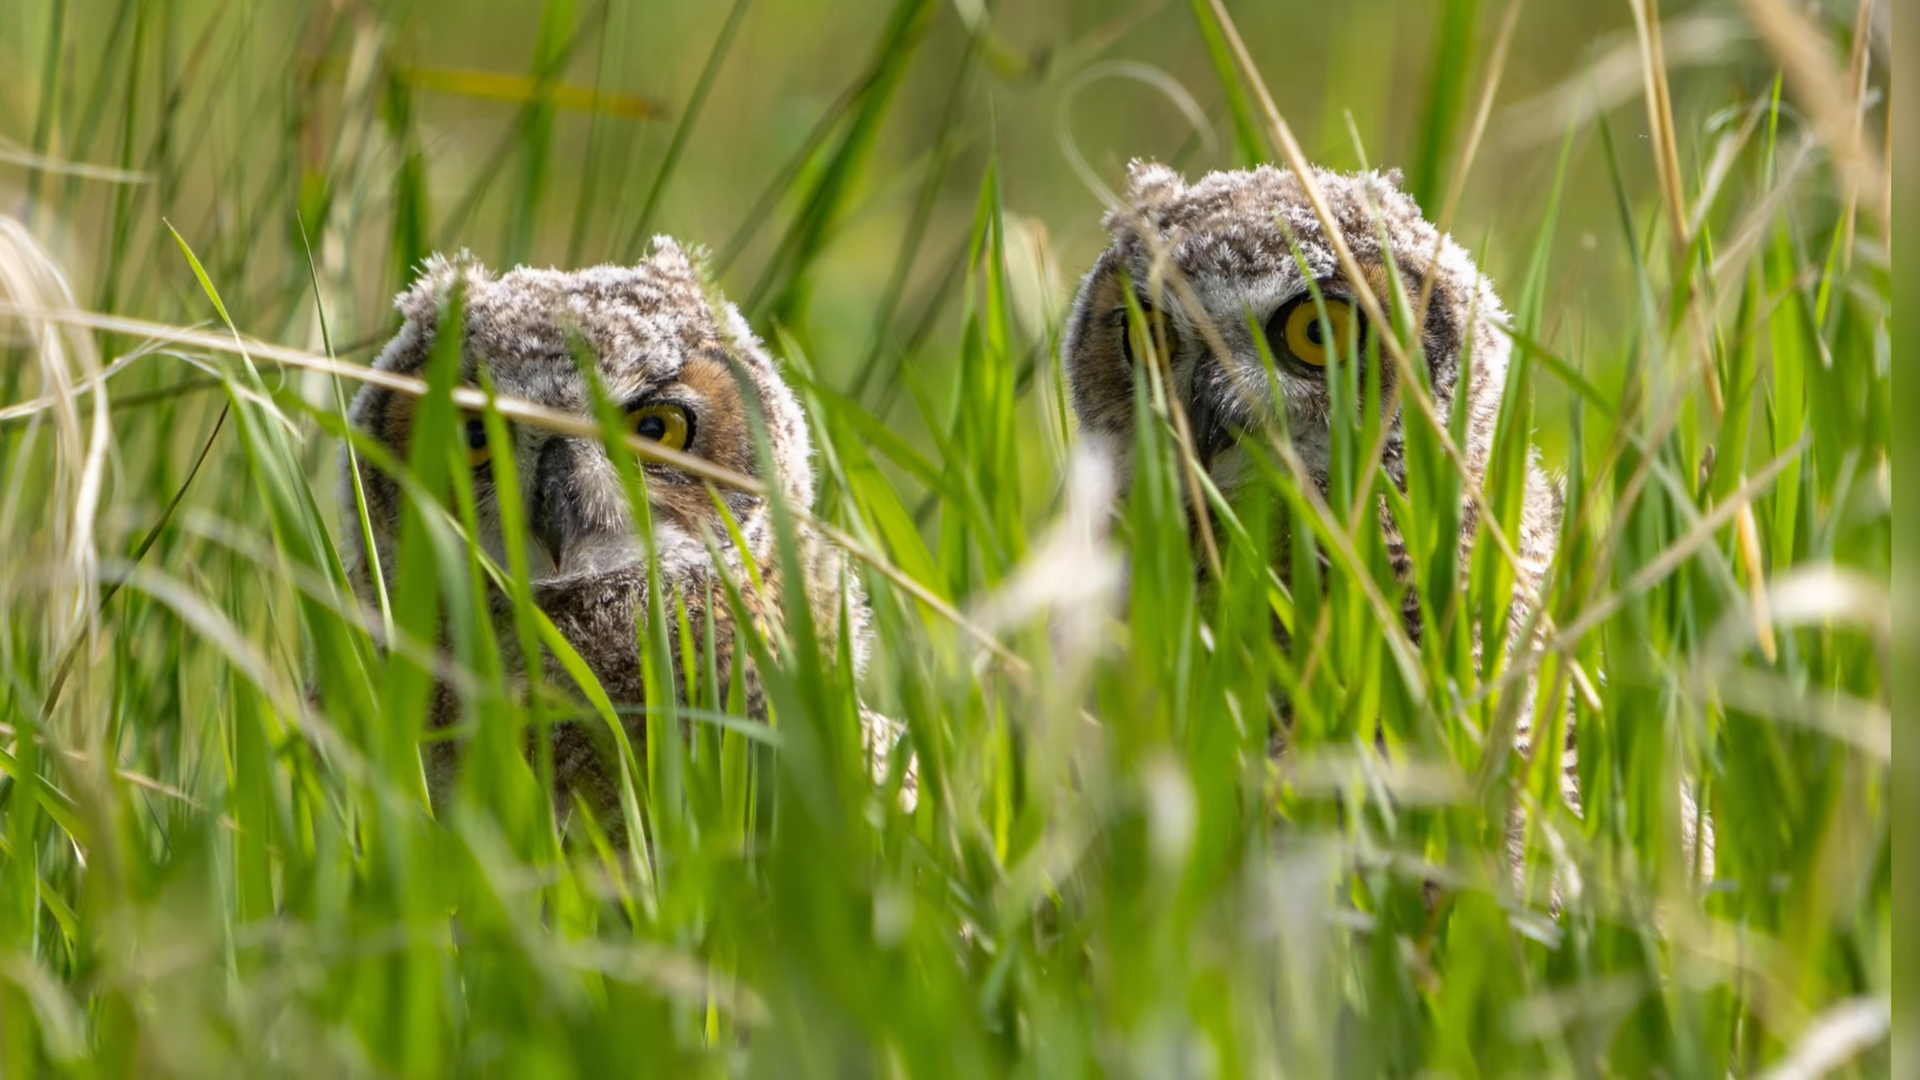 Young Great Horned Owls